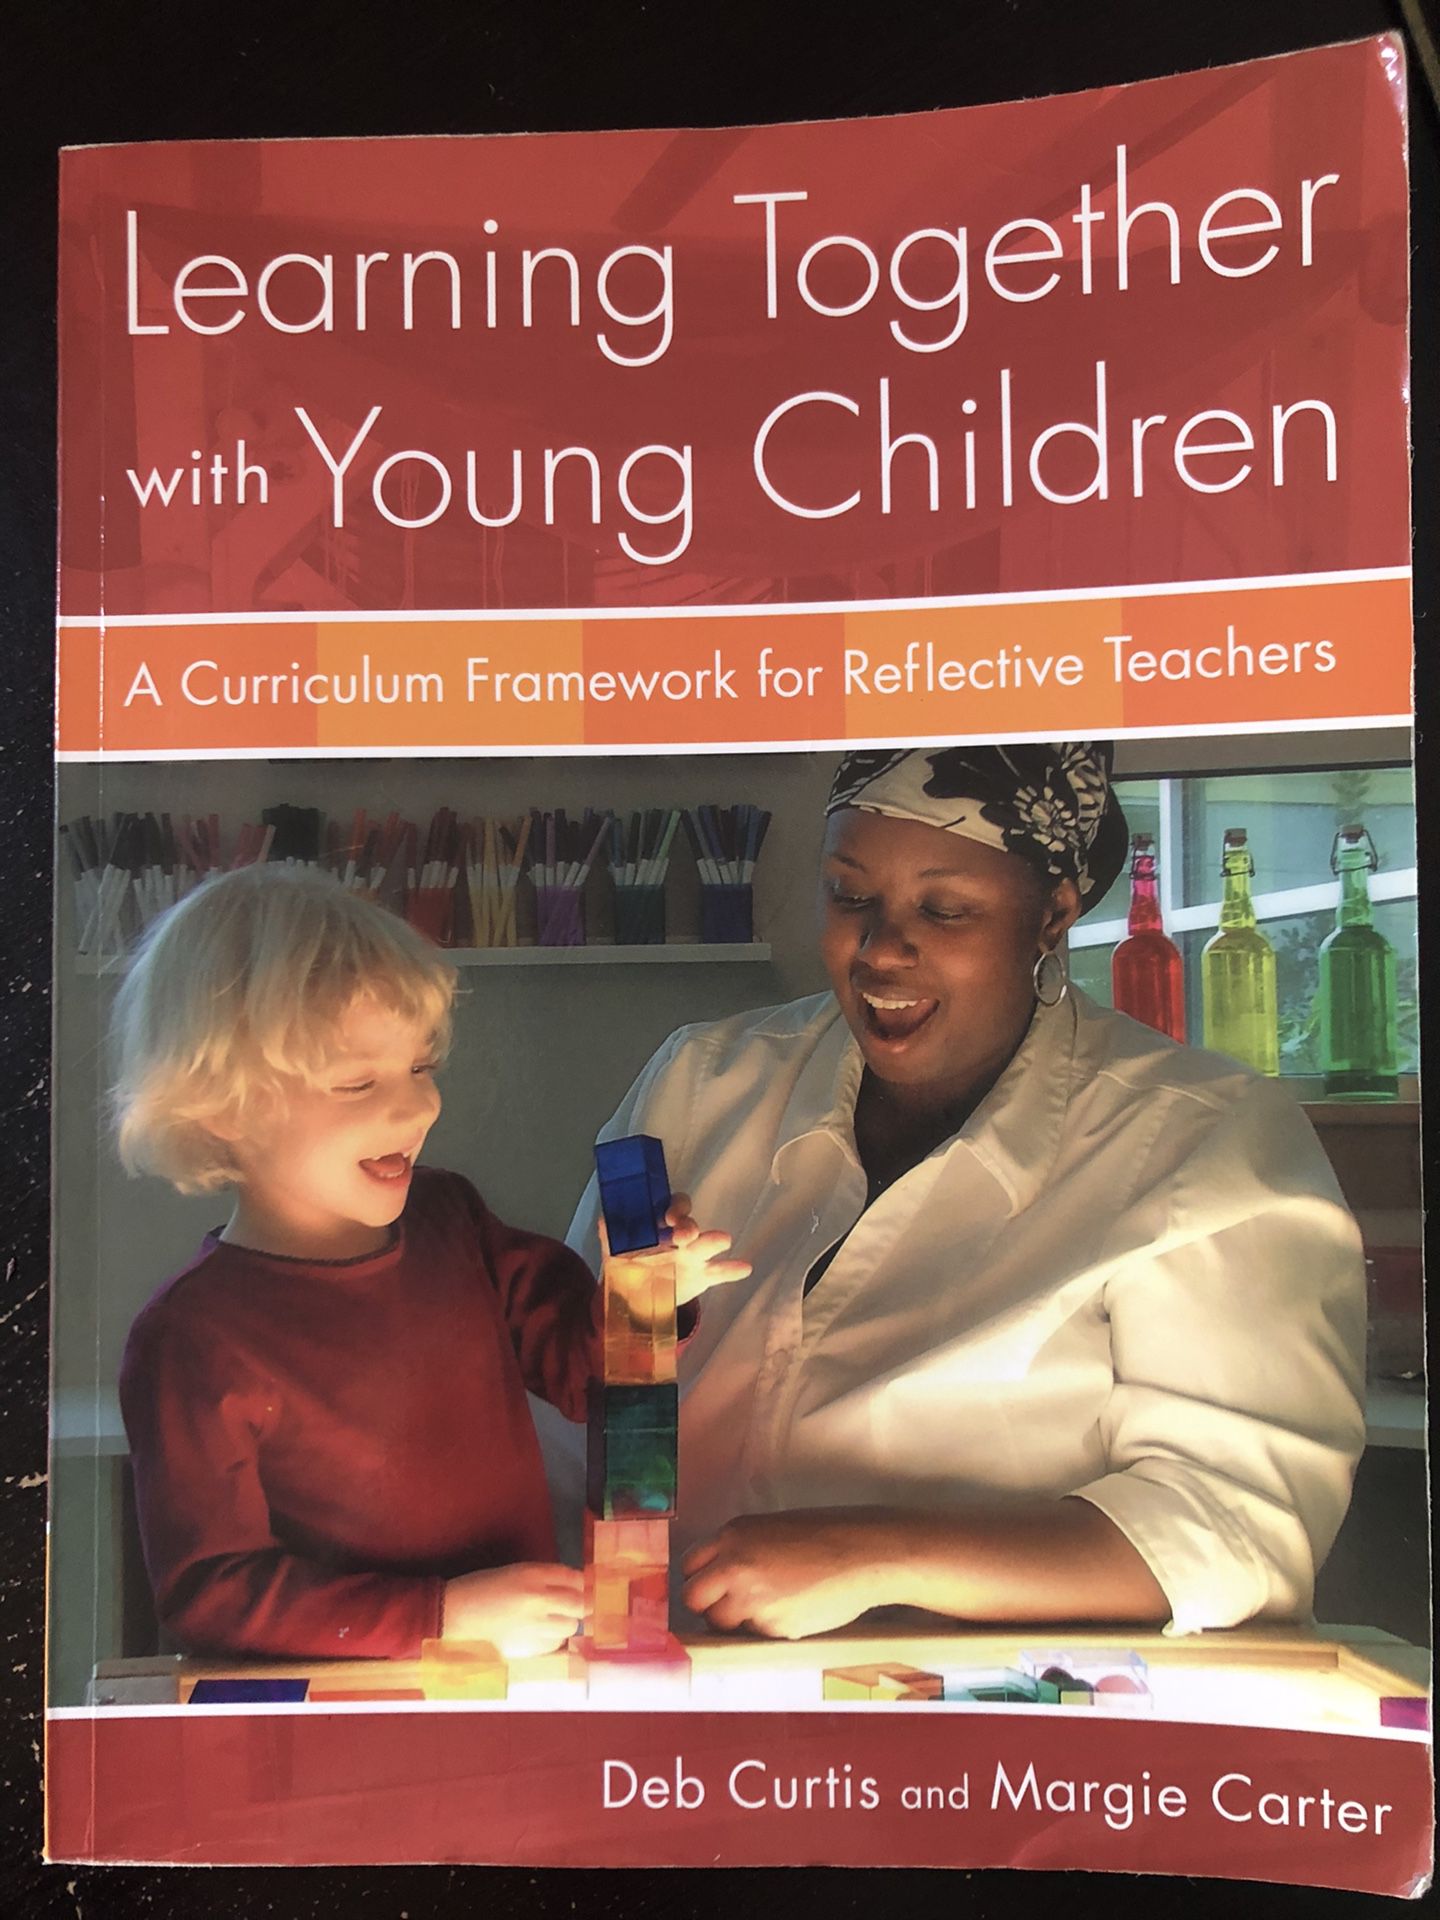 Learning together with young children (child development book)